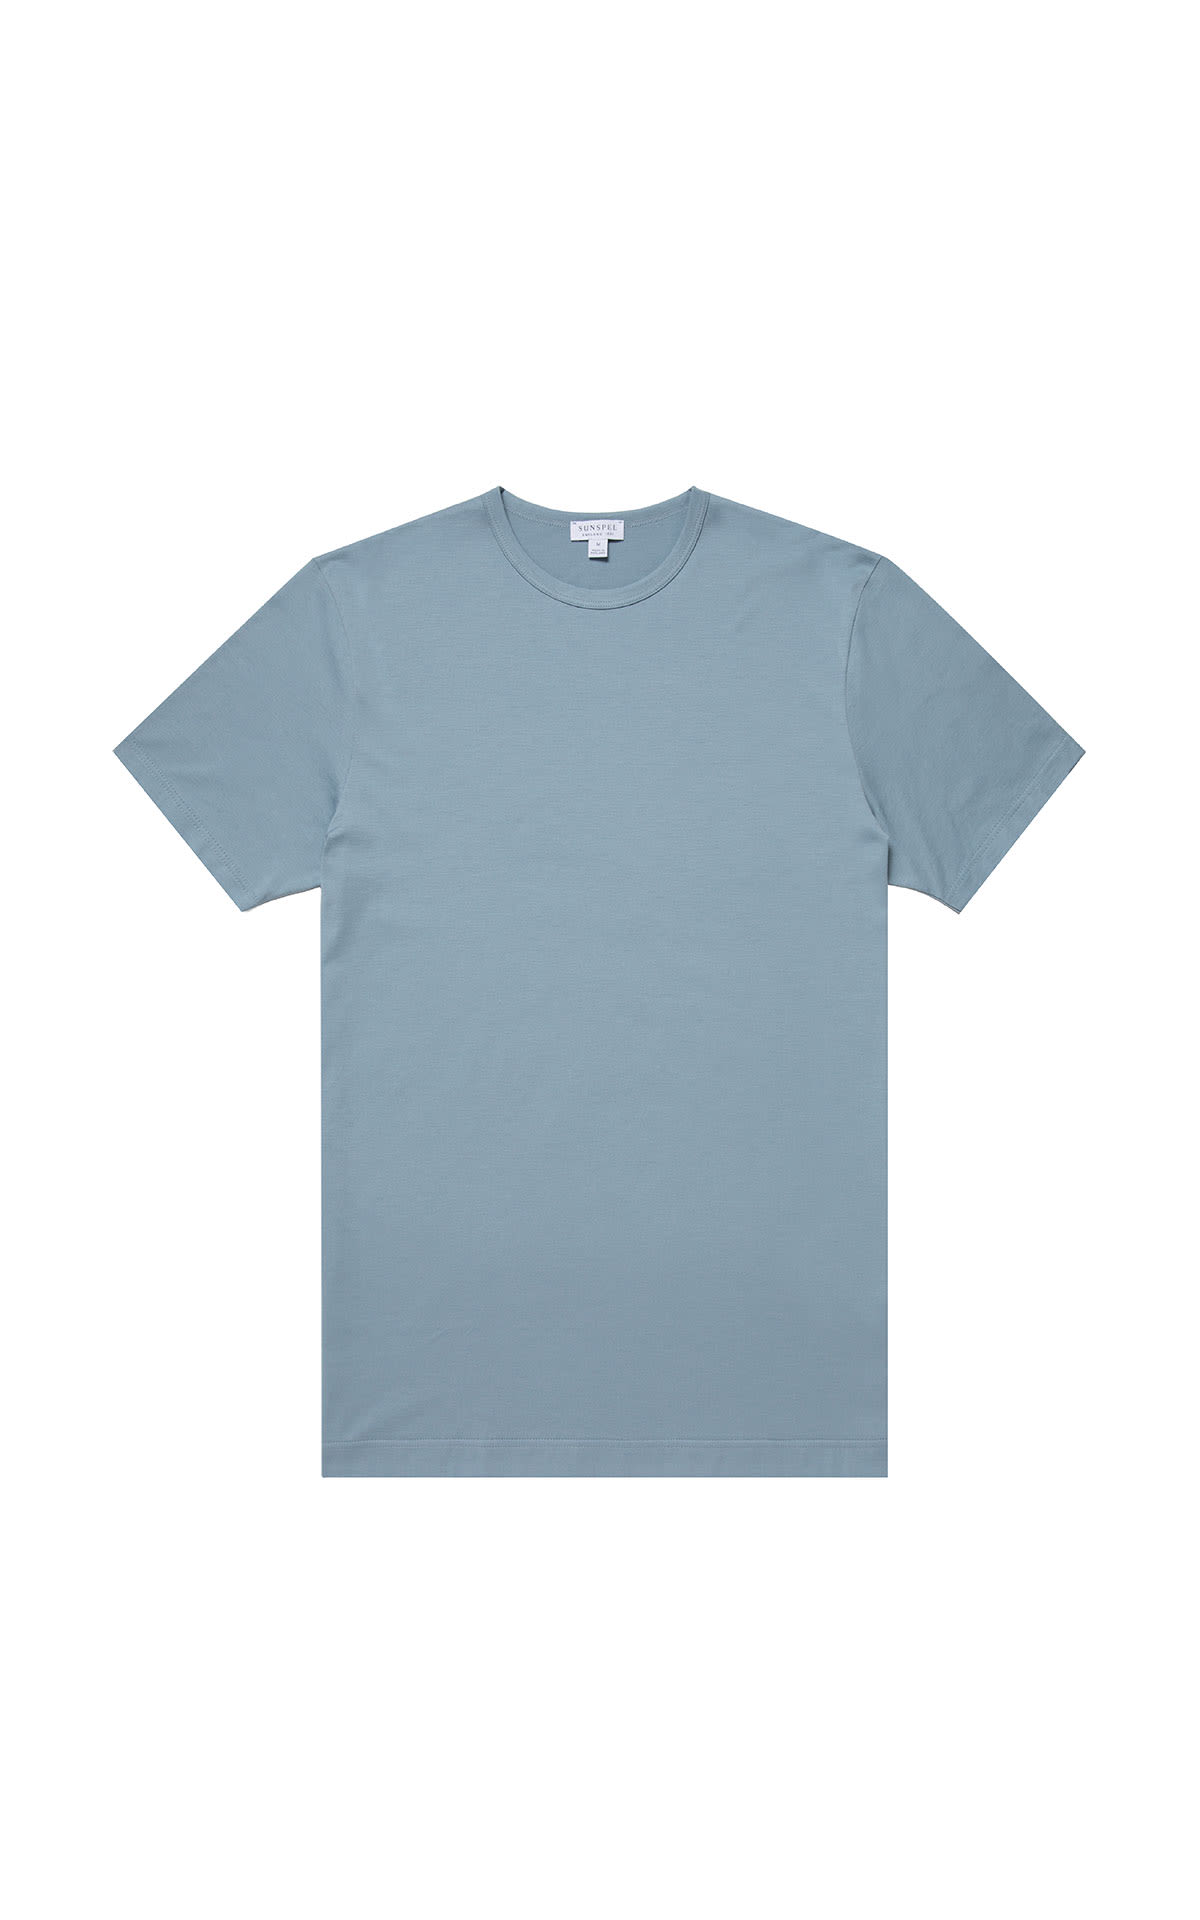 Sunspel Classic t-shirt in blue steel from Bicester Village